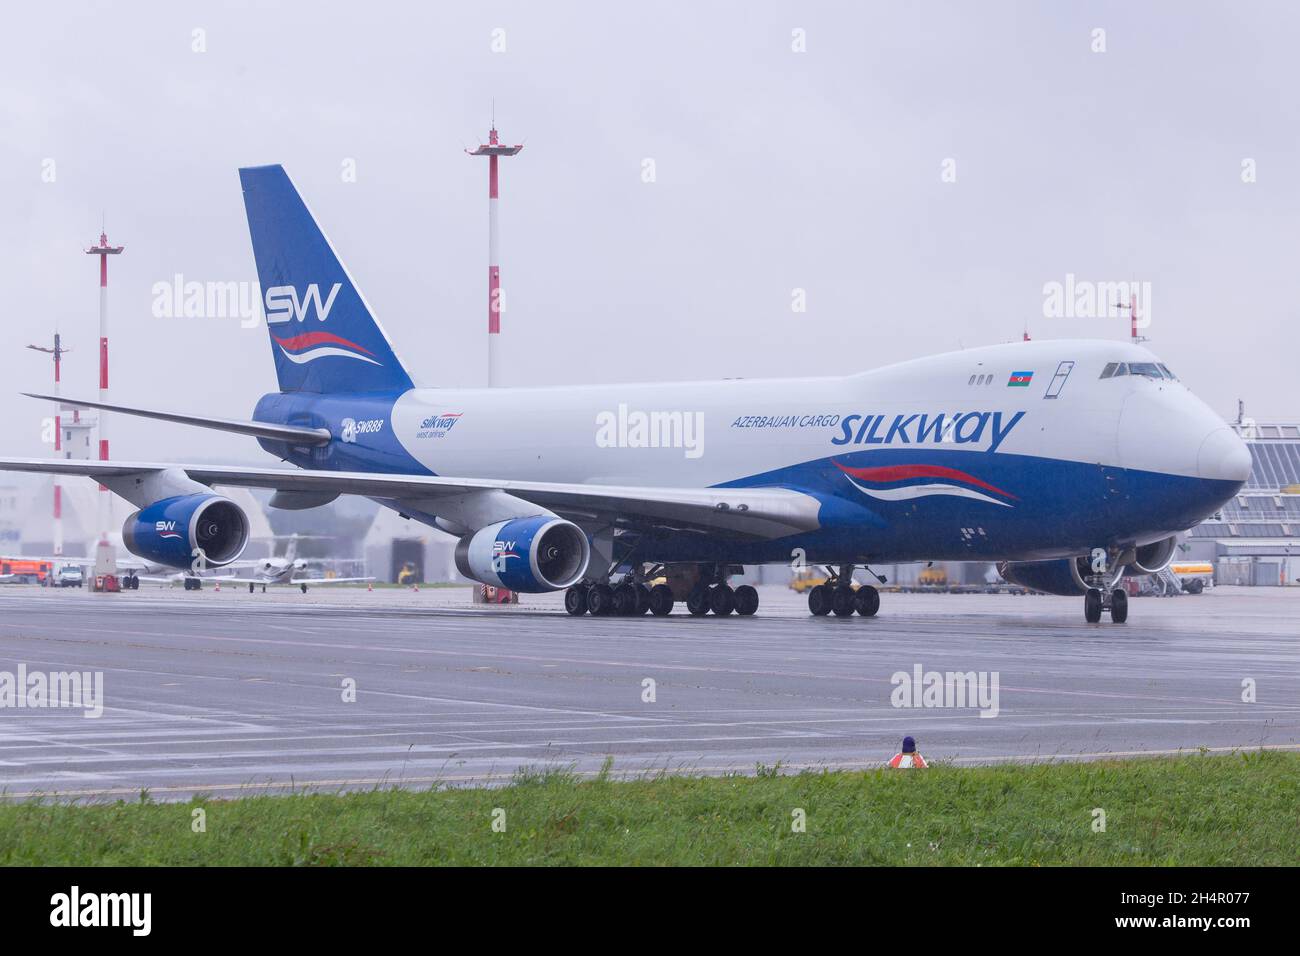 LINZ, AUSTRIA - Oct 10, 2021: Silkway Azerbaijan Cargo Airlines Boeing 747-400F freighter on the apron in Linz Stock Photo